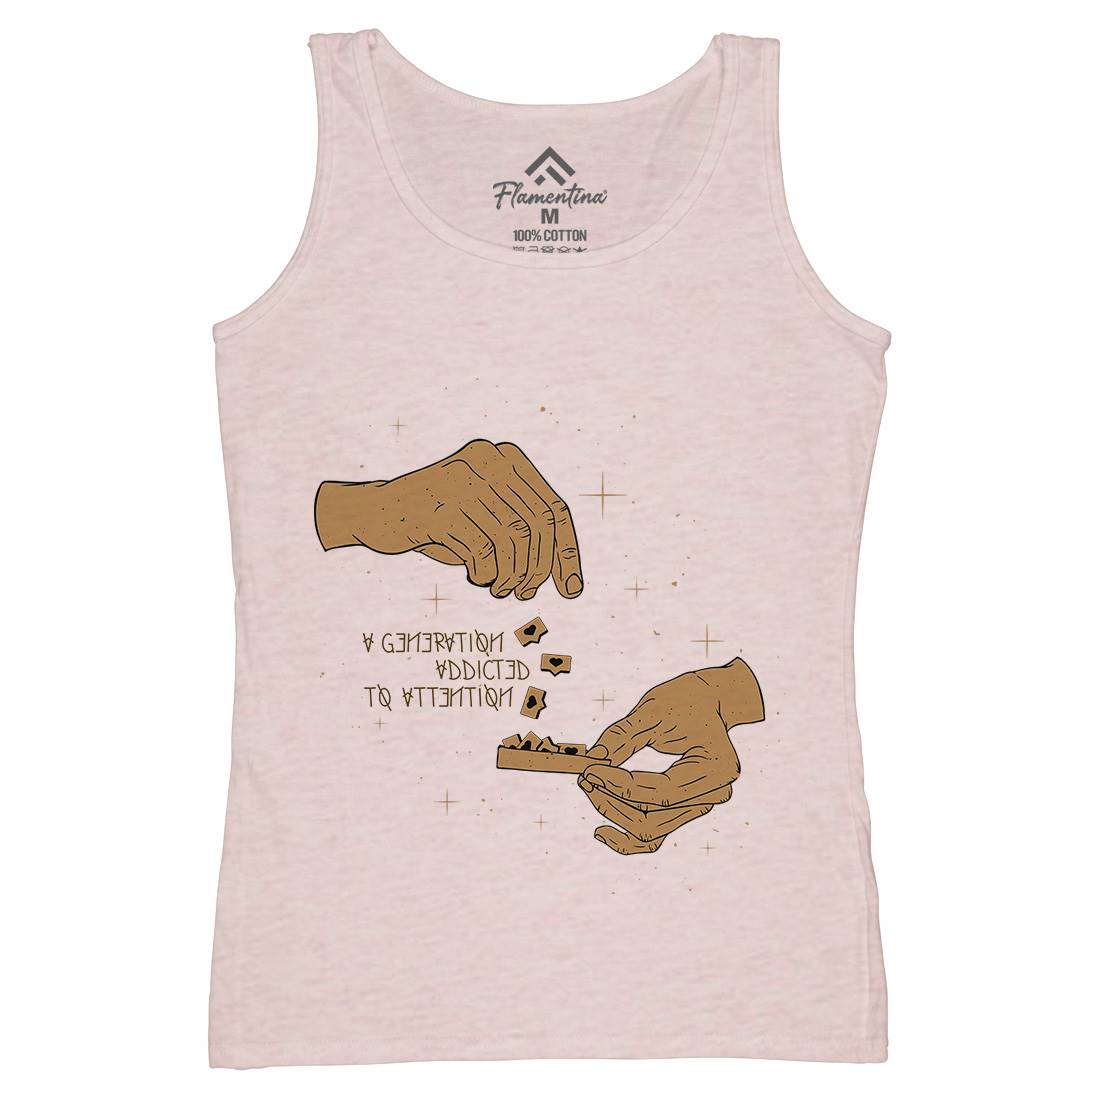 Addicted To Attention Womens Organic Tank Top Vest Media D442